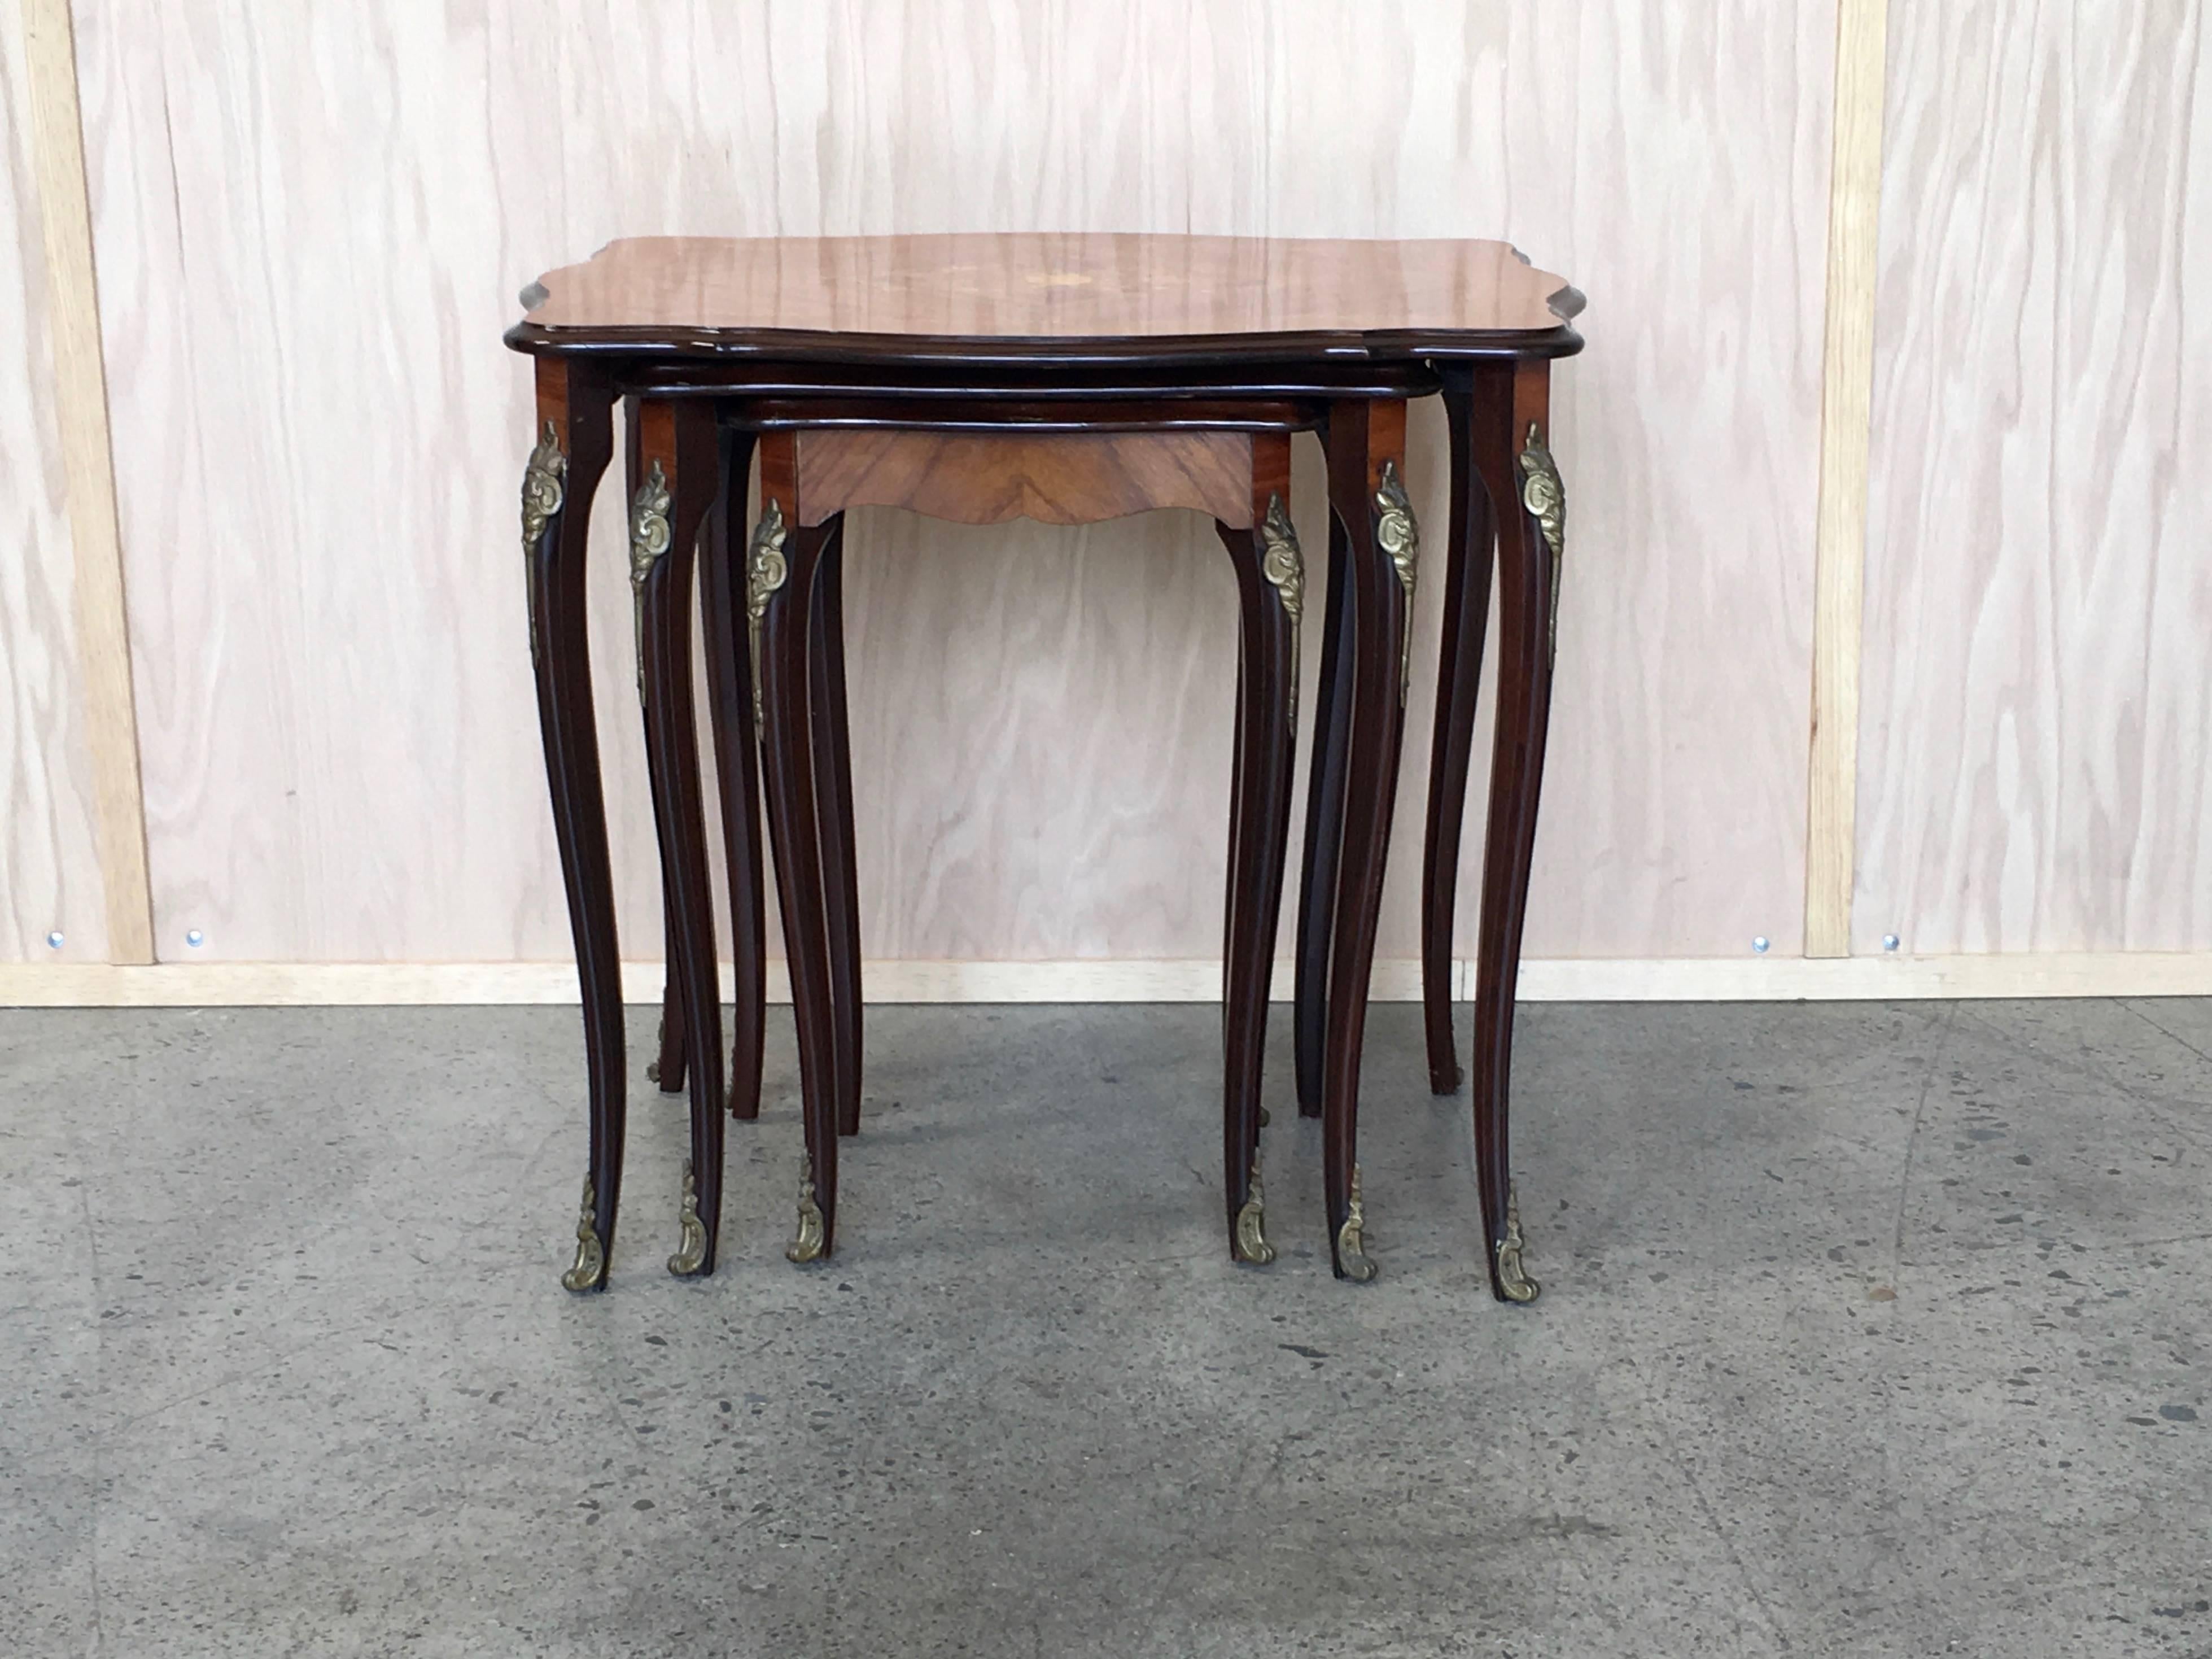 Swedish Nest of Three Tables with Floral Marquetry Design and Ormolu